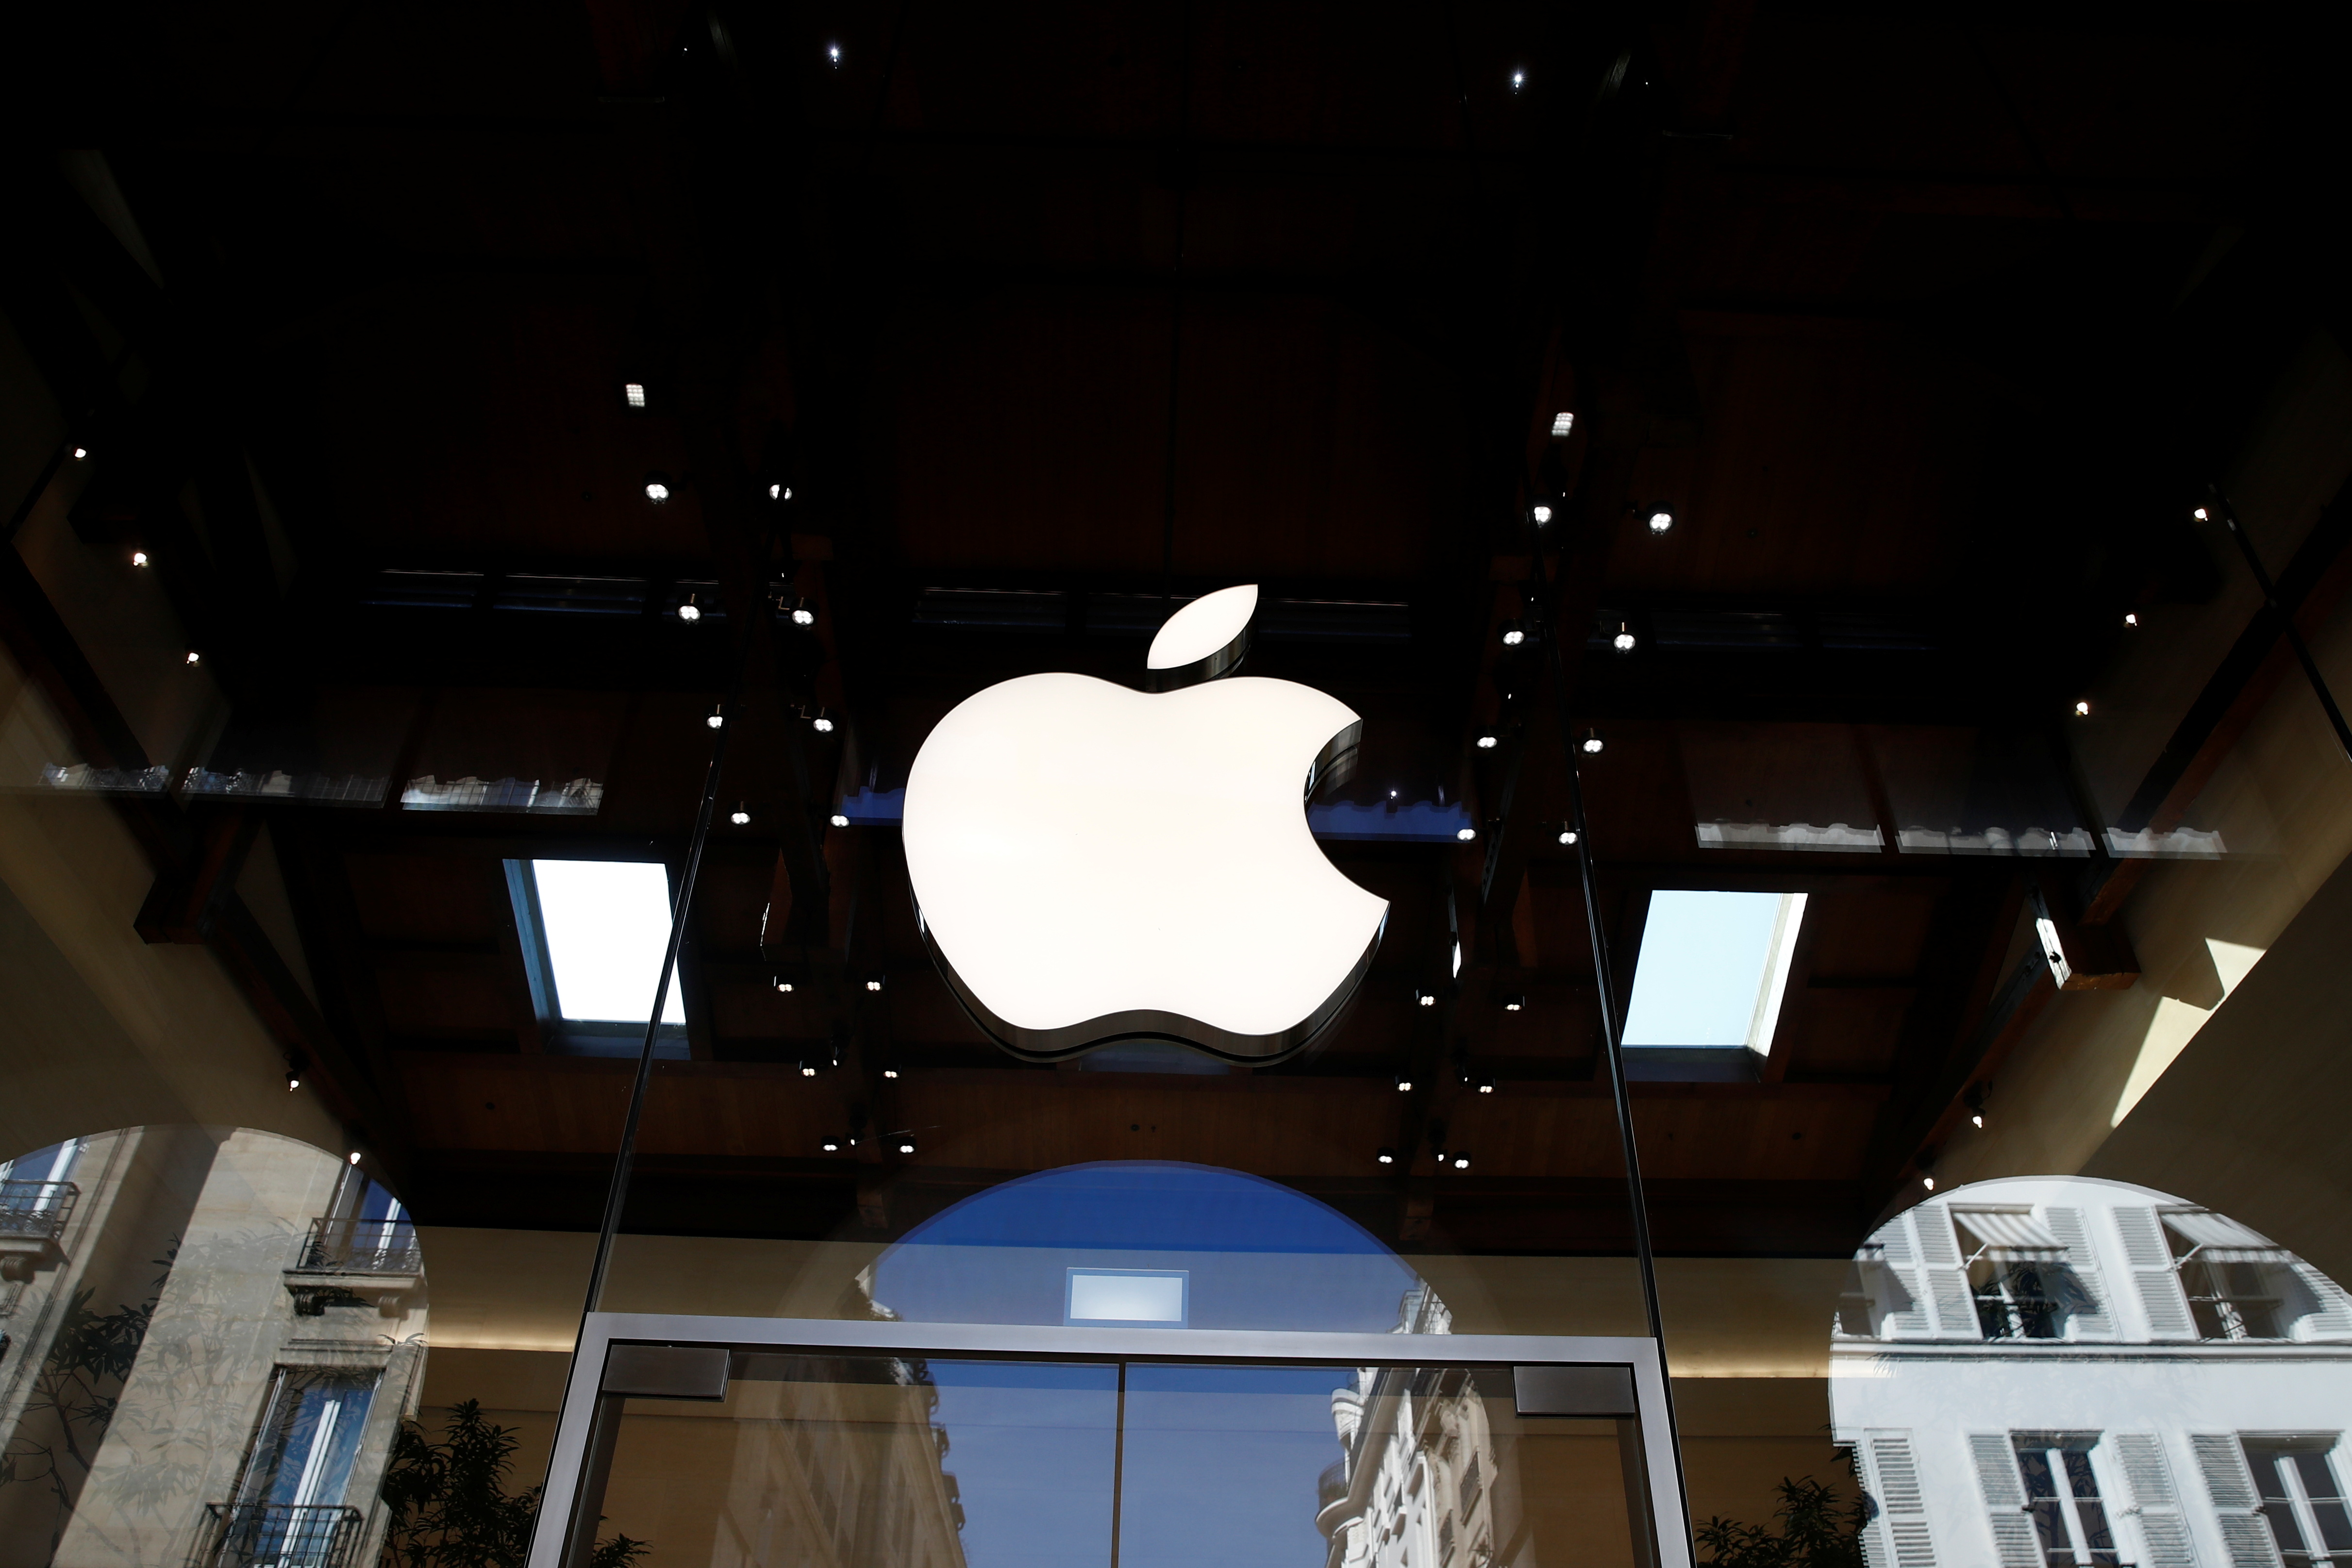 An Apple logo is pictured in an Apple store in Paris, France September 17, 2021. REUTERS/Gonzalo Fuentes